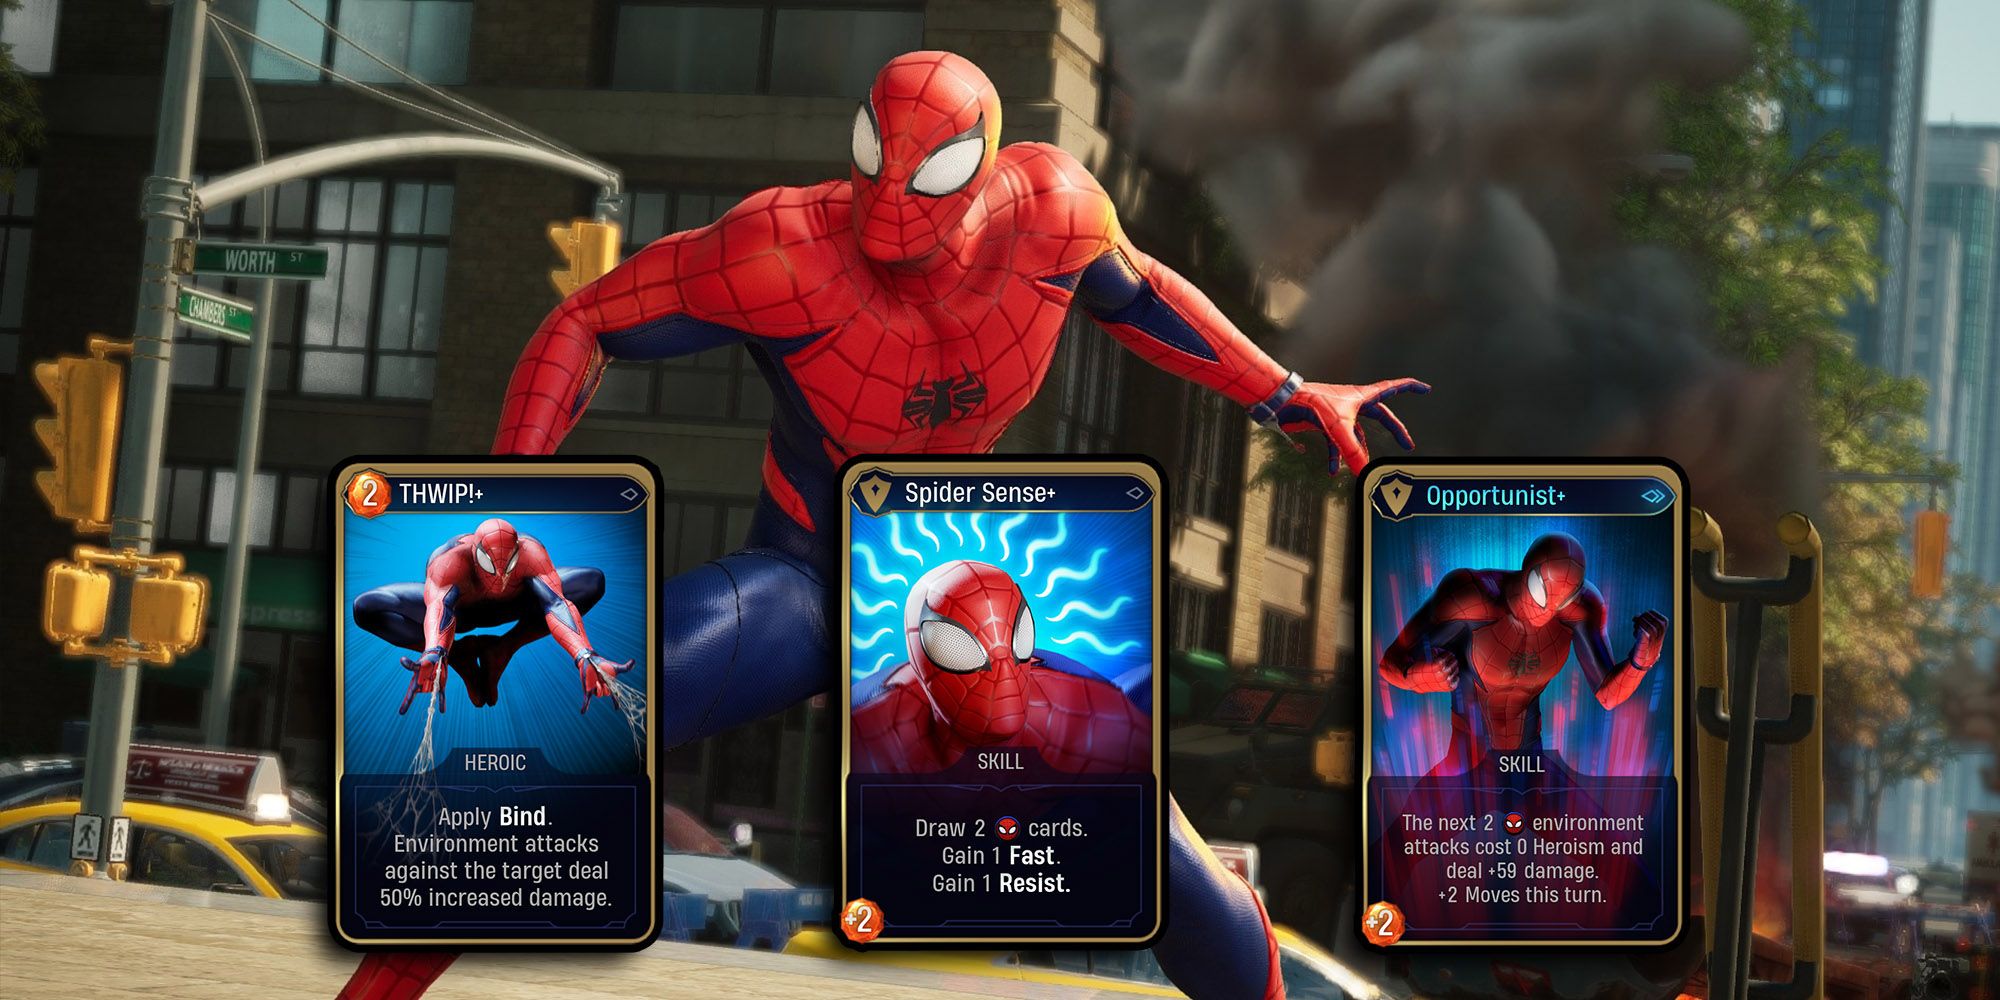 Marvel Midnight Suns - Spider Mans Best Card Upgrades Over Image Of Him In-Game